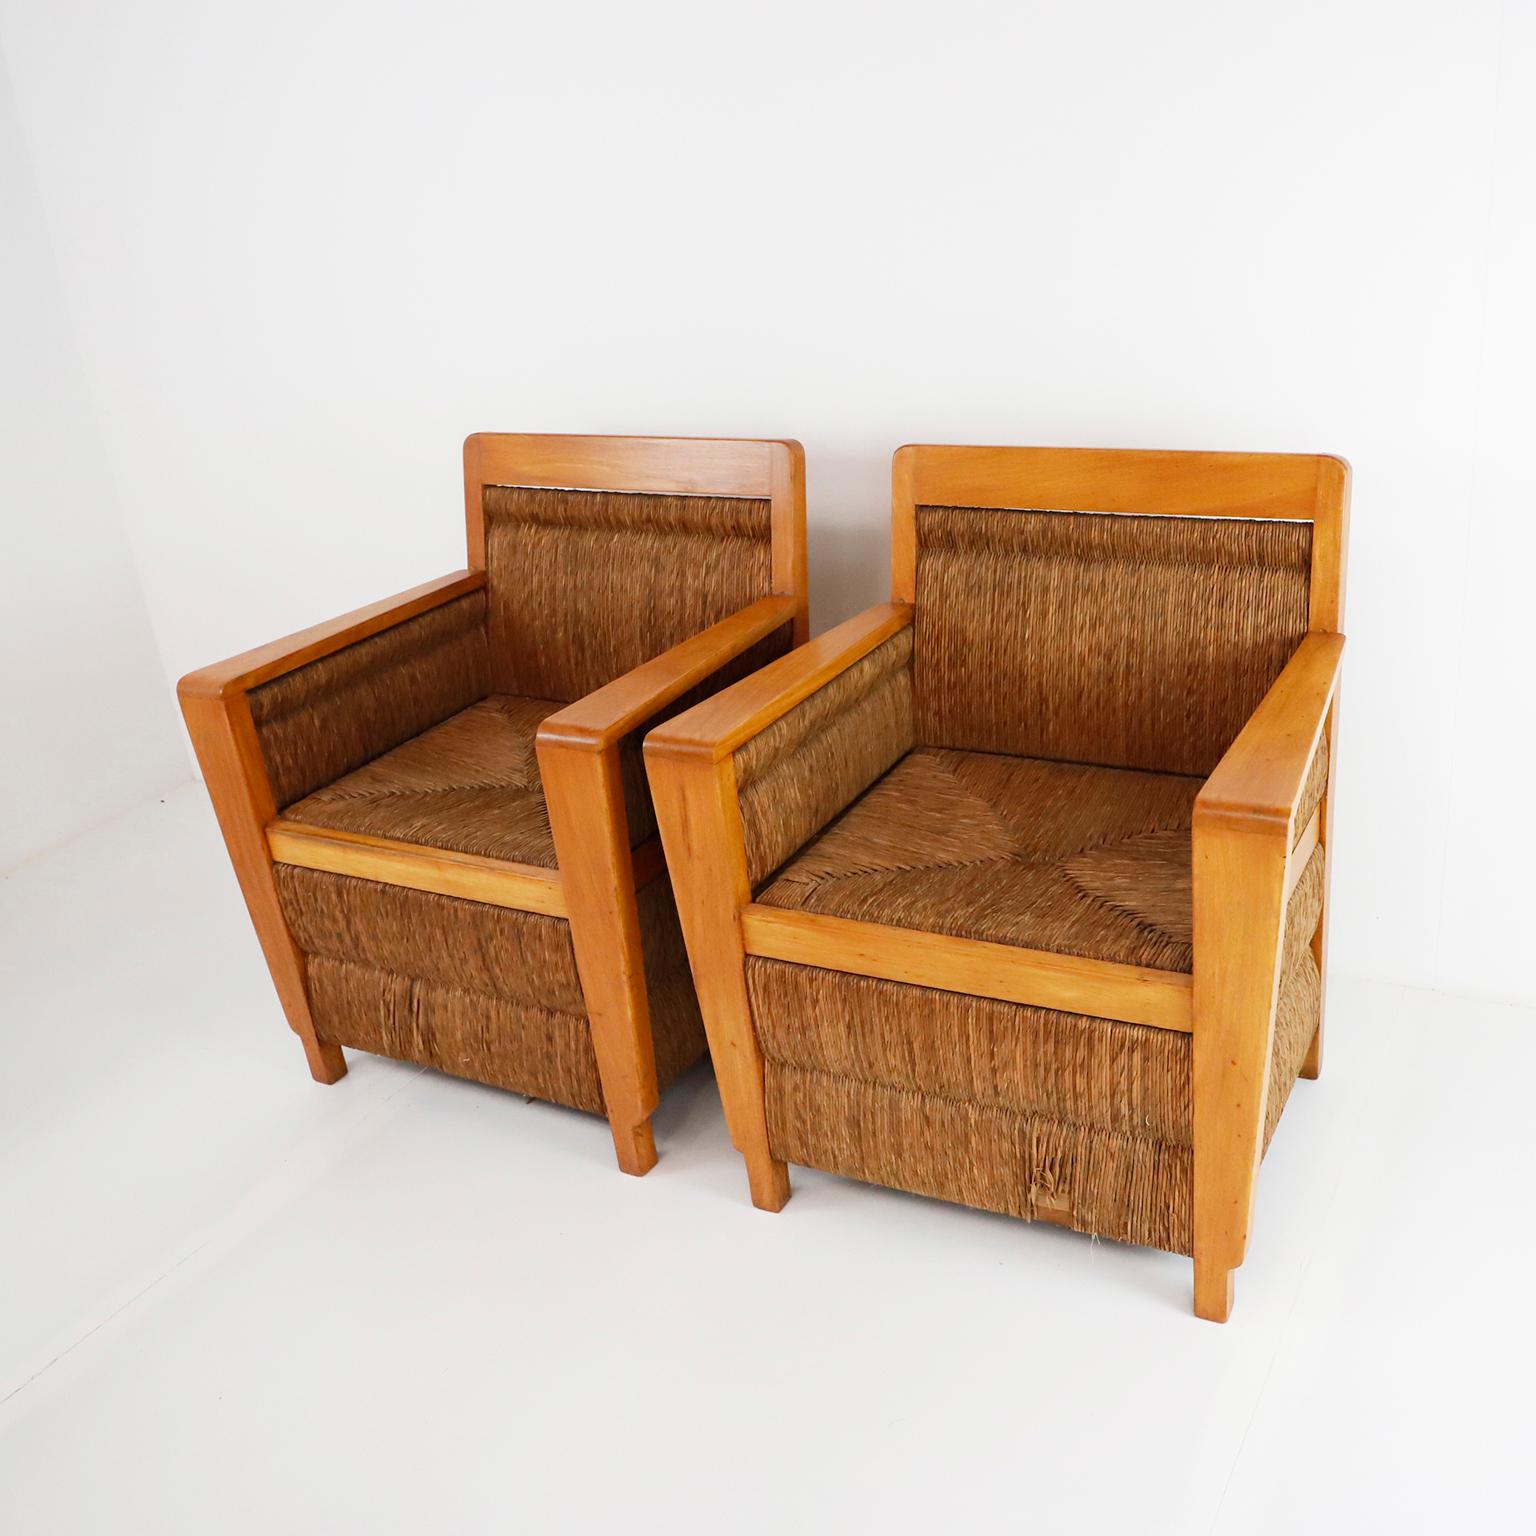 Pair of Mexican Mid-Century Modern Woven Armchairs In Good Condition For Sale In Mexico City, CDMX